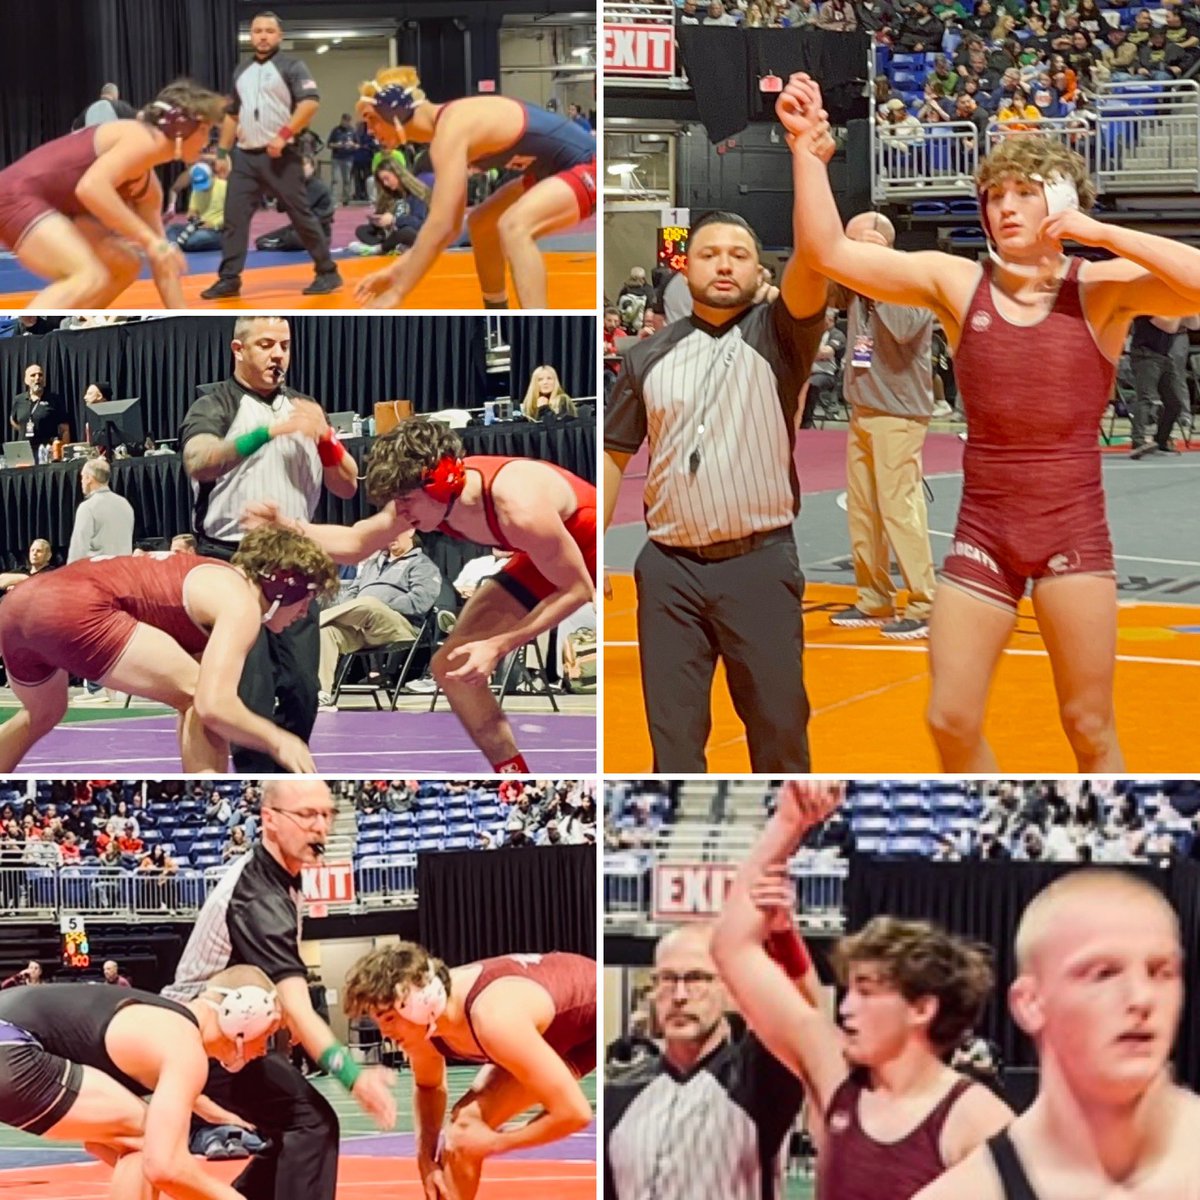 UIL State Wrestling Tournament, Jared made it to the 2nd day & final 8 (2-2) but lost in the blood round, not placing in the top 6. He had an awesome tournament. It’s an excellent start as a Freshman setting up the next 3 years for some excitement. #WildcatProud #Wildcat💪